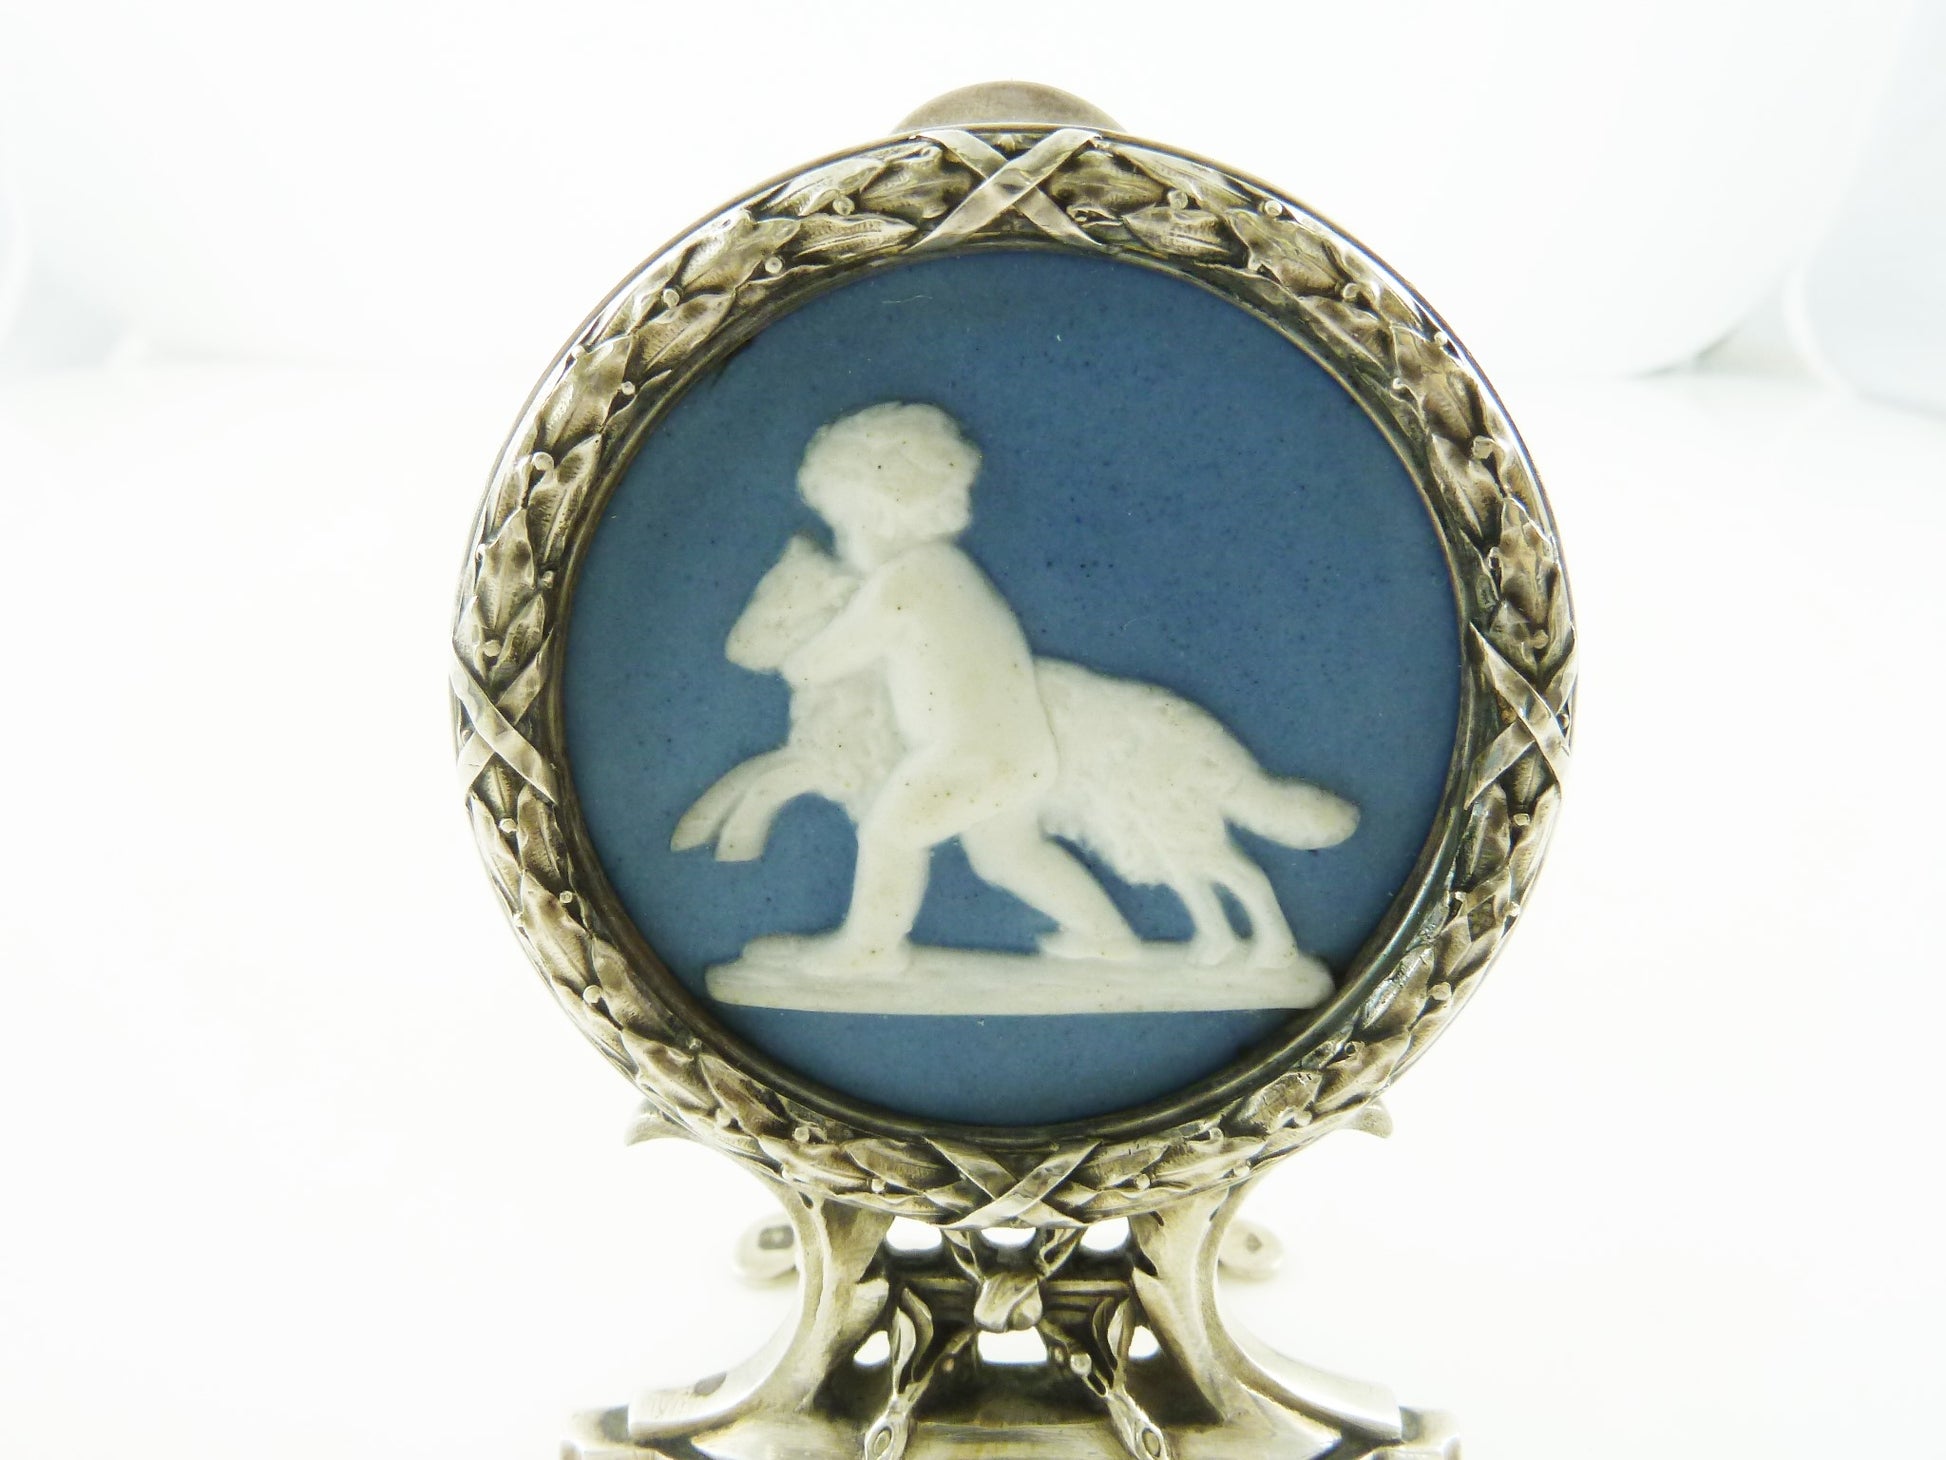 Antique French Sterling Silver & Porcelain Menu Holder, Large in Size with Putto and Lamb - 43 Chesapeake Court Antiques